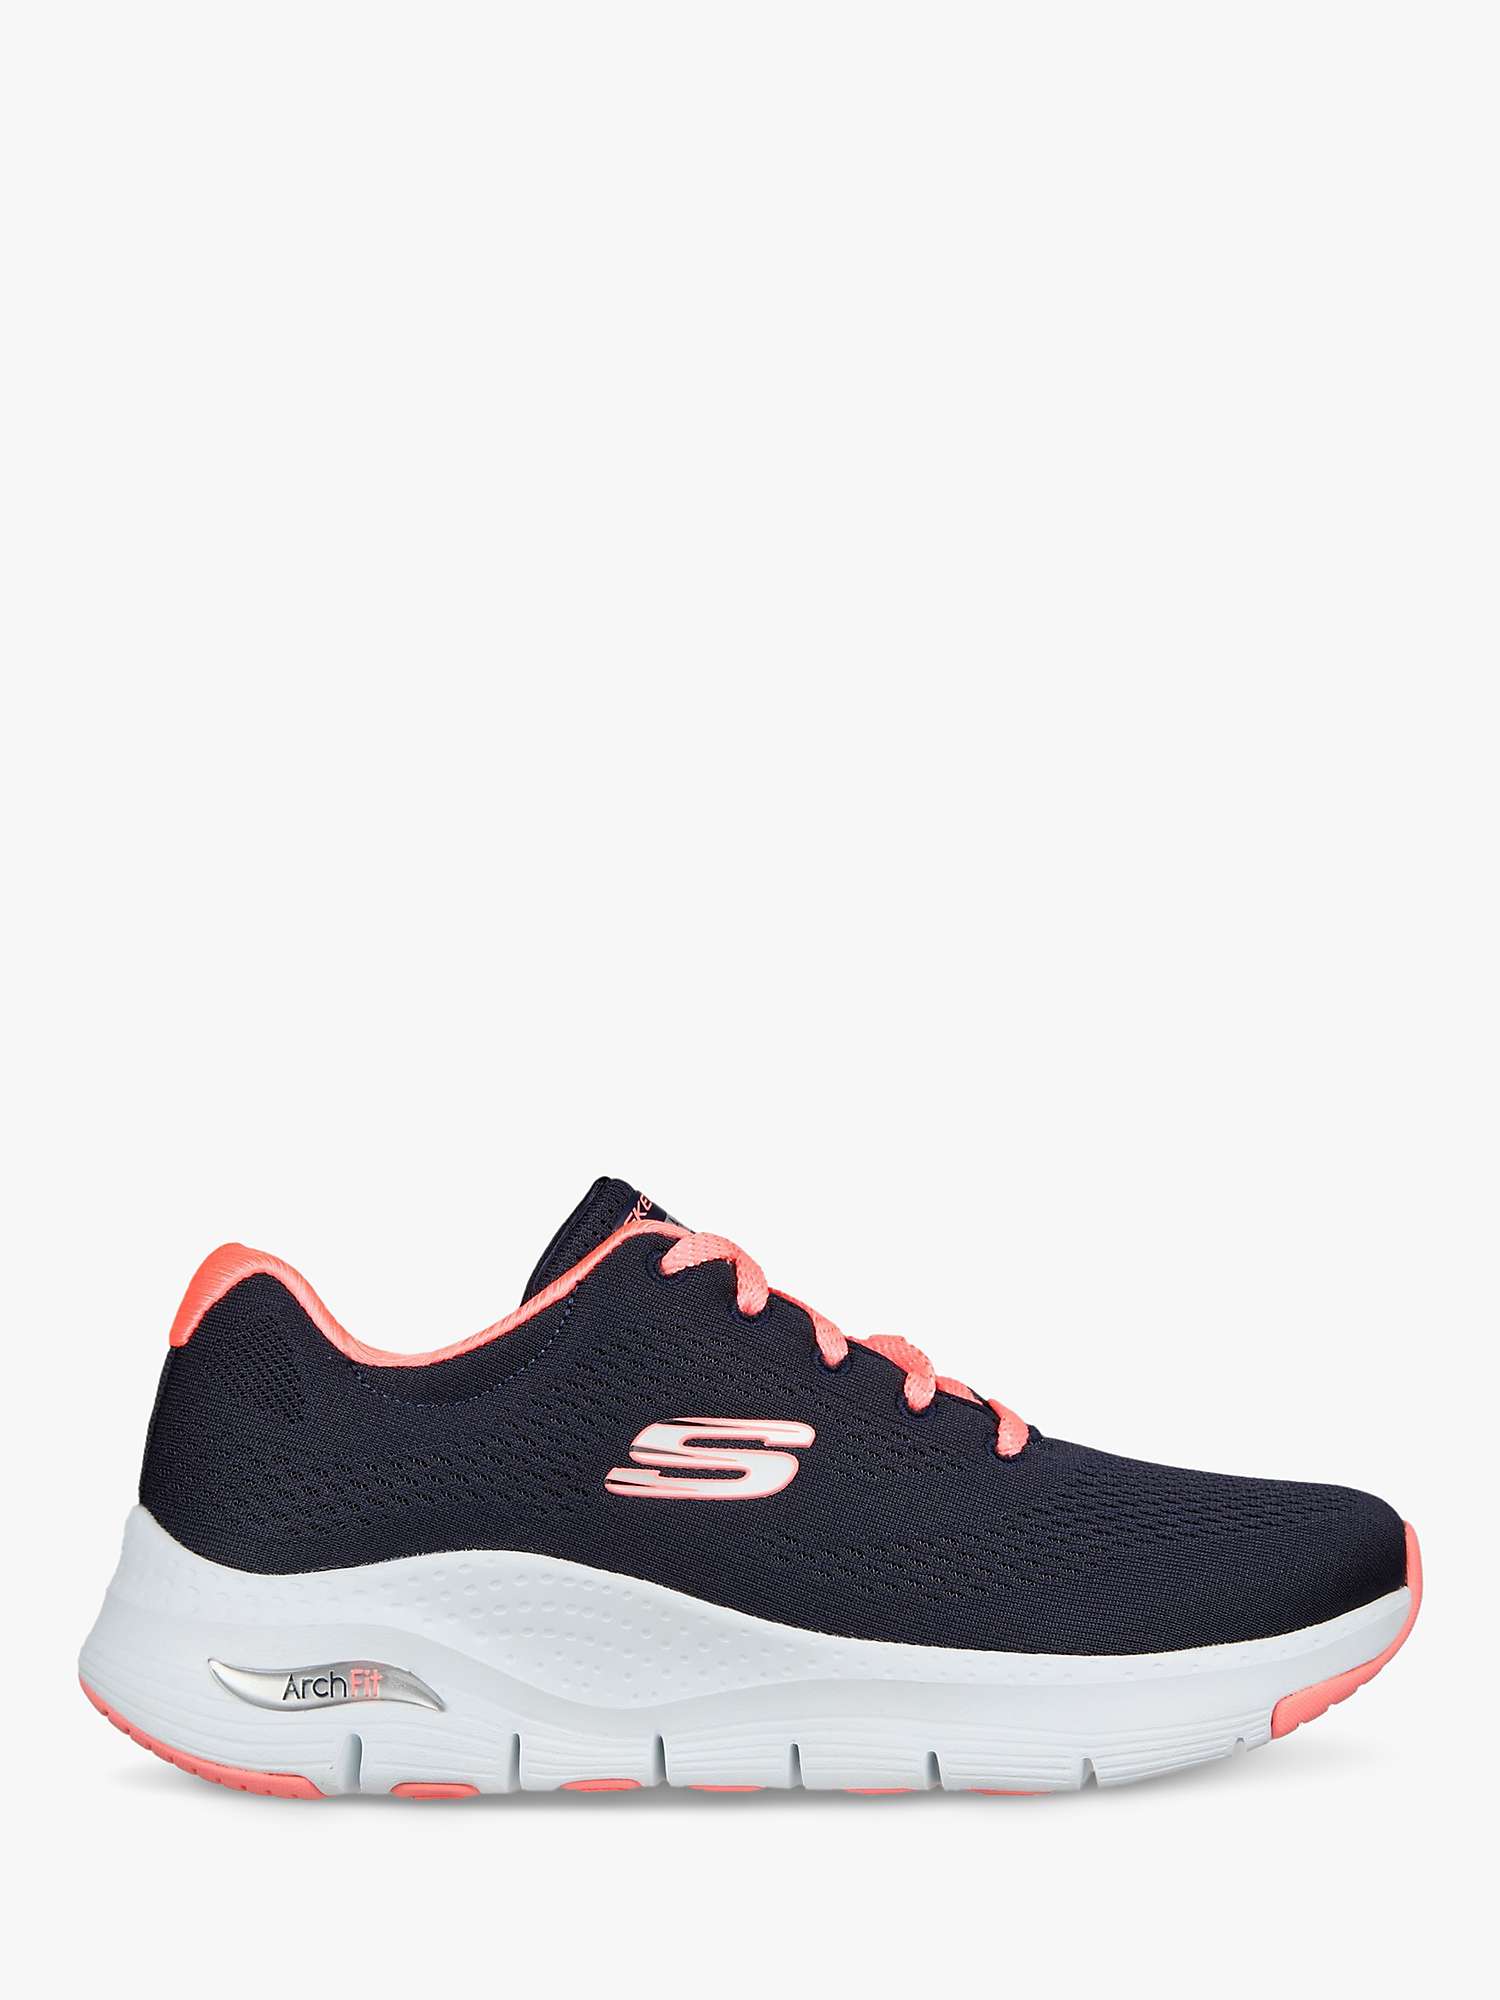 Skechers Arch Sunny Outlook Trainers, Navy/Coral Lewis & Partners